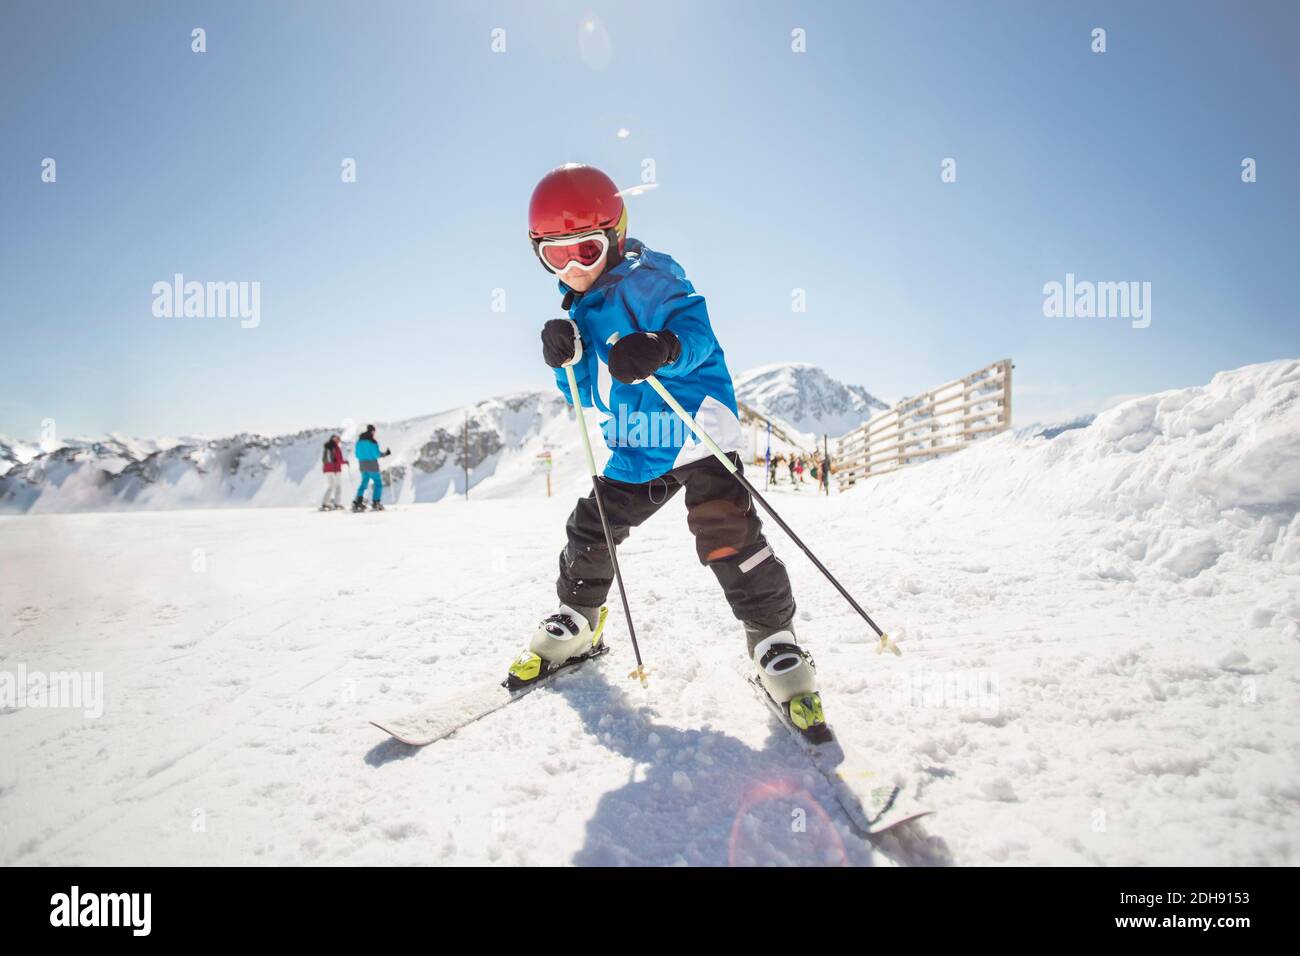 Full length of boy skiing on snow covered field against clear sky Stock Photo